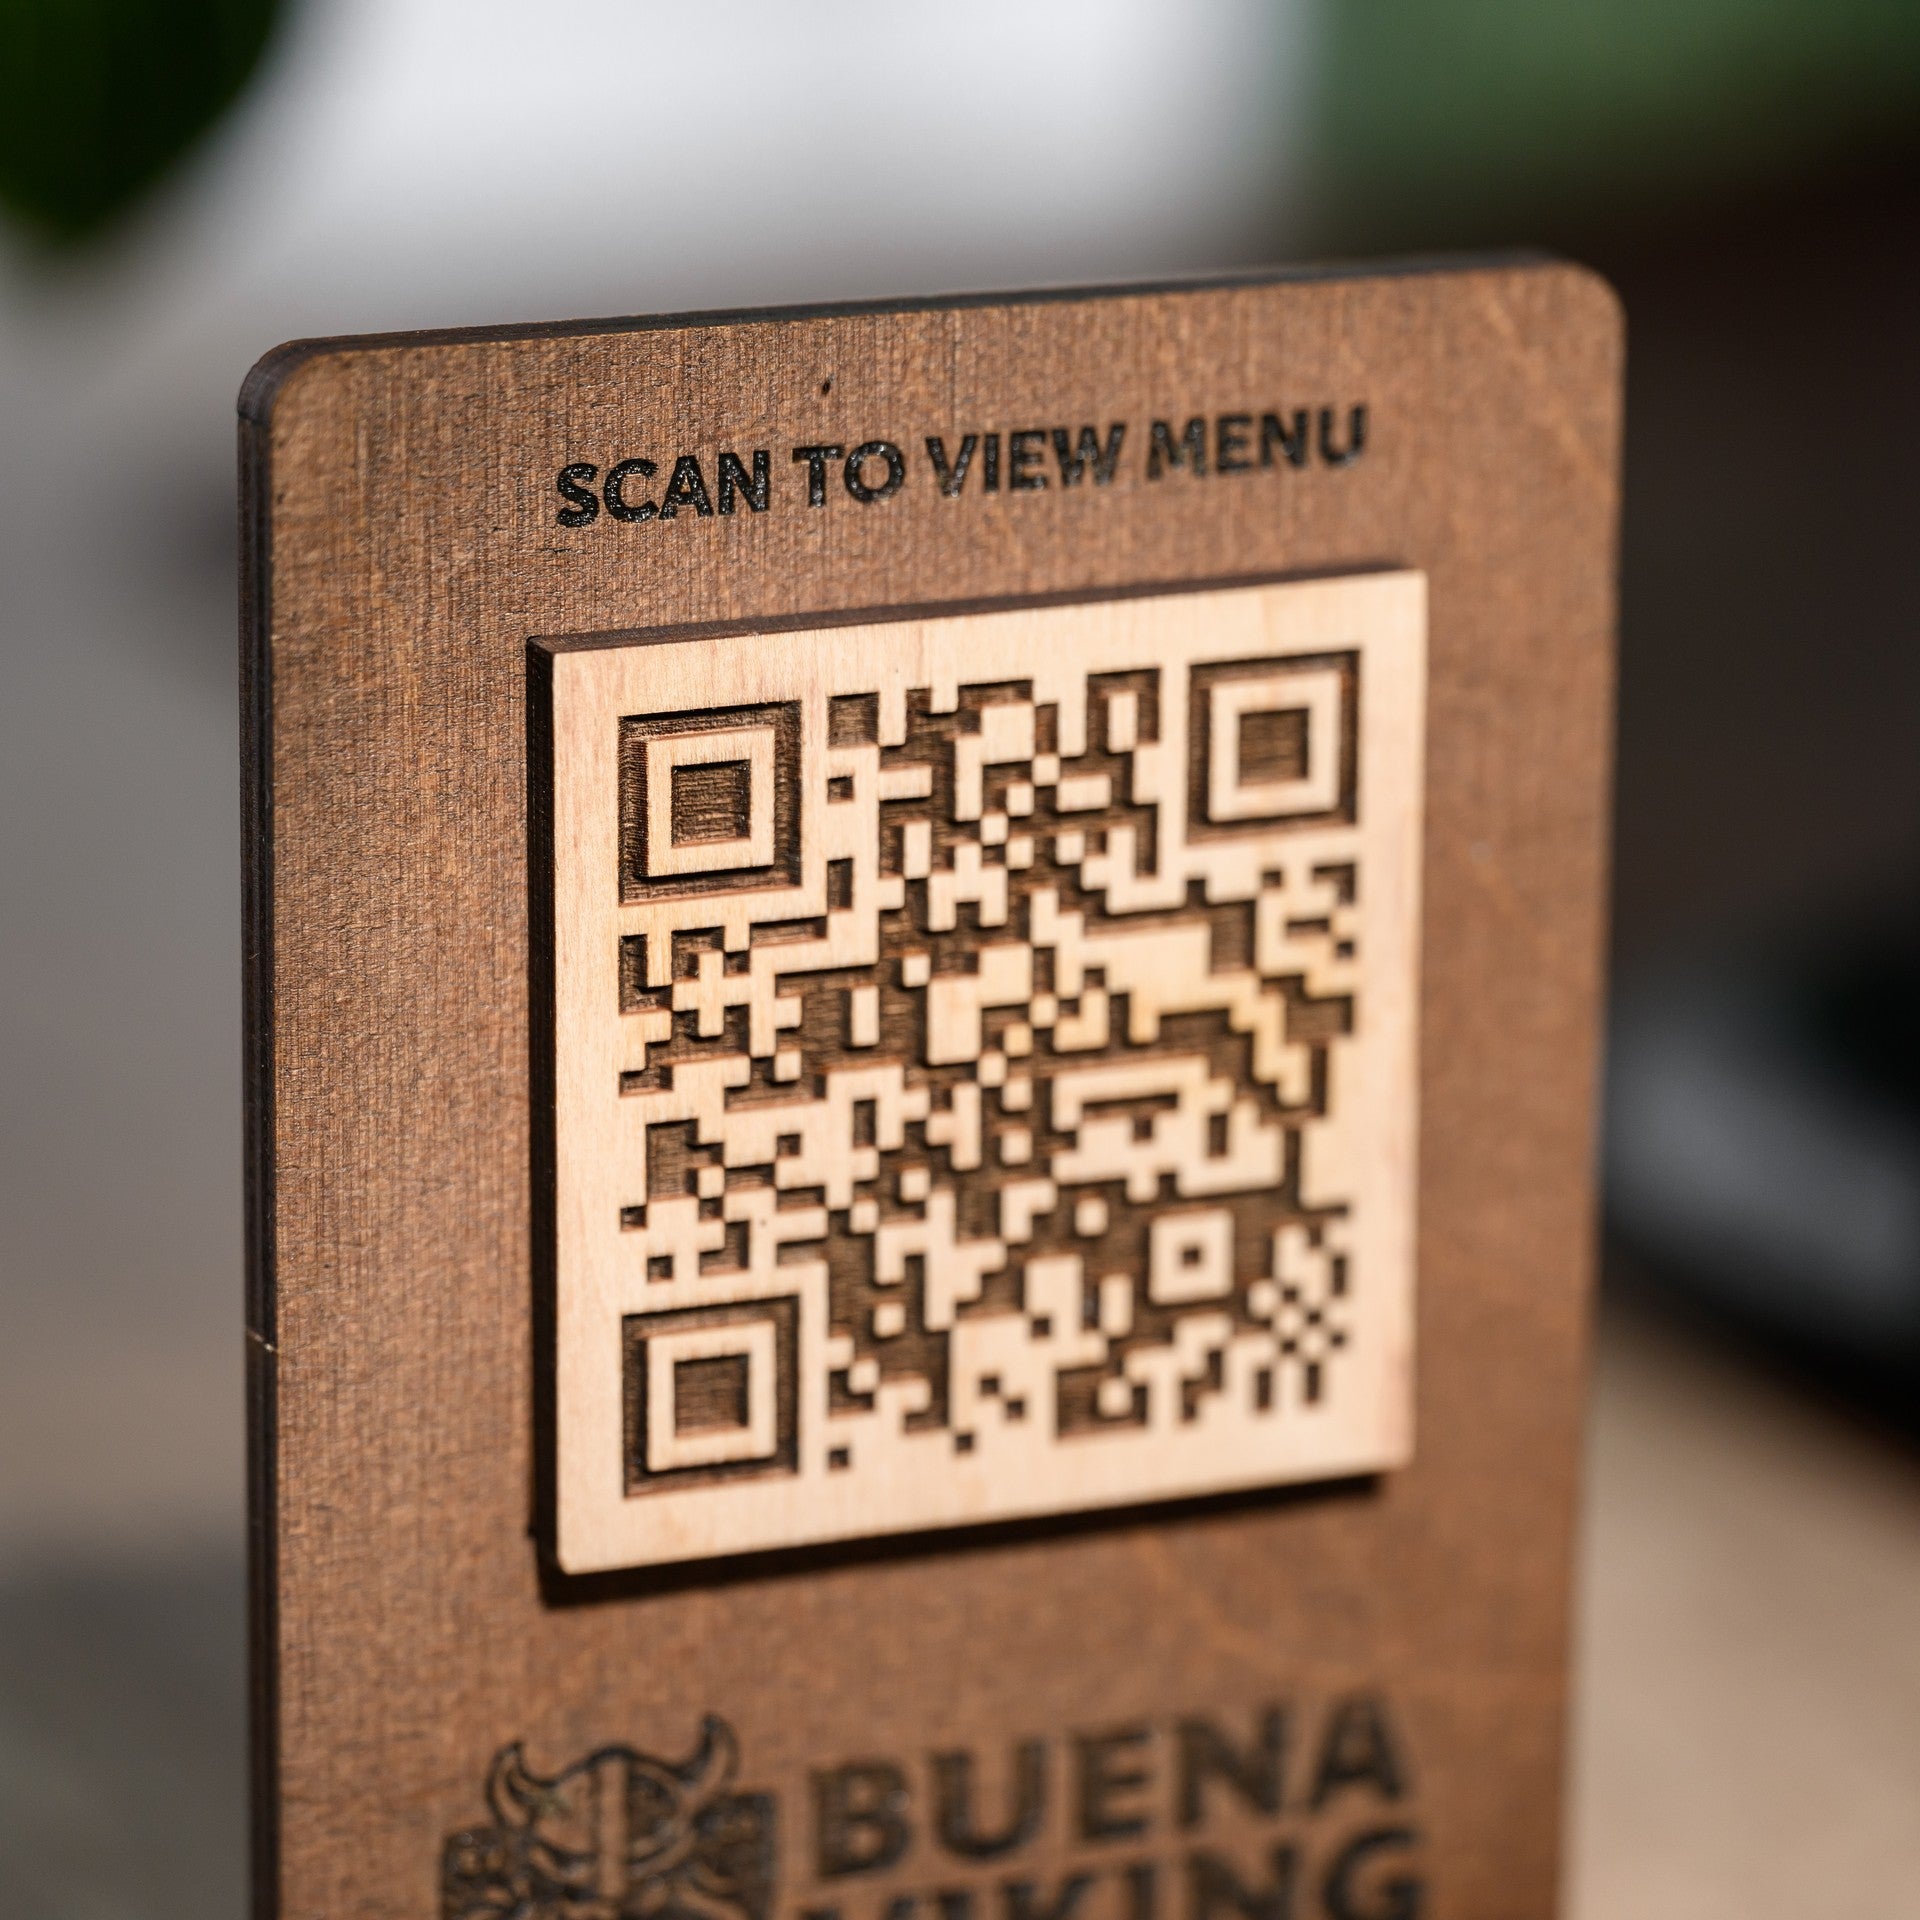 Touchless Menu Sign for a modern dining experience. Scannable QR code on a desktop stand, perfect for cafes and bars.